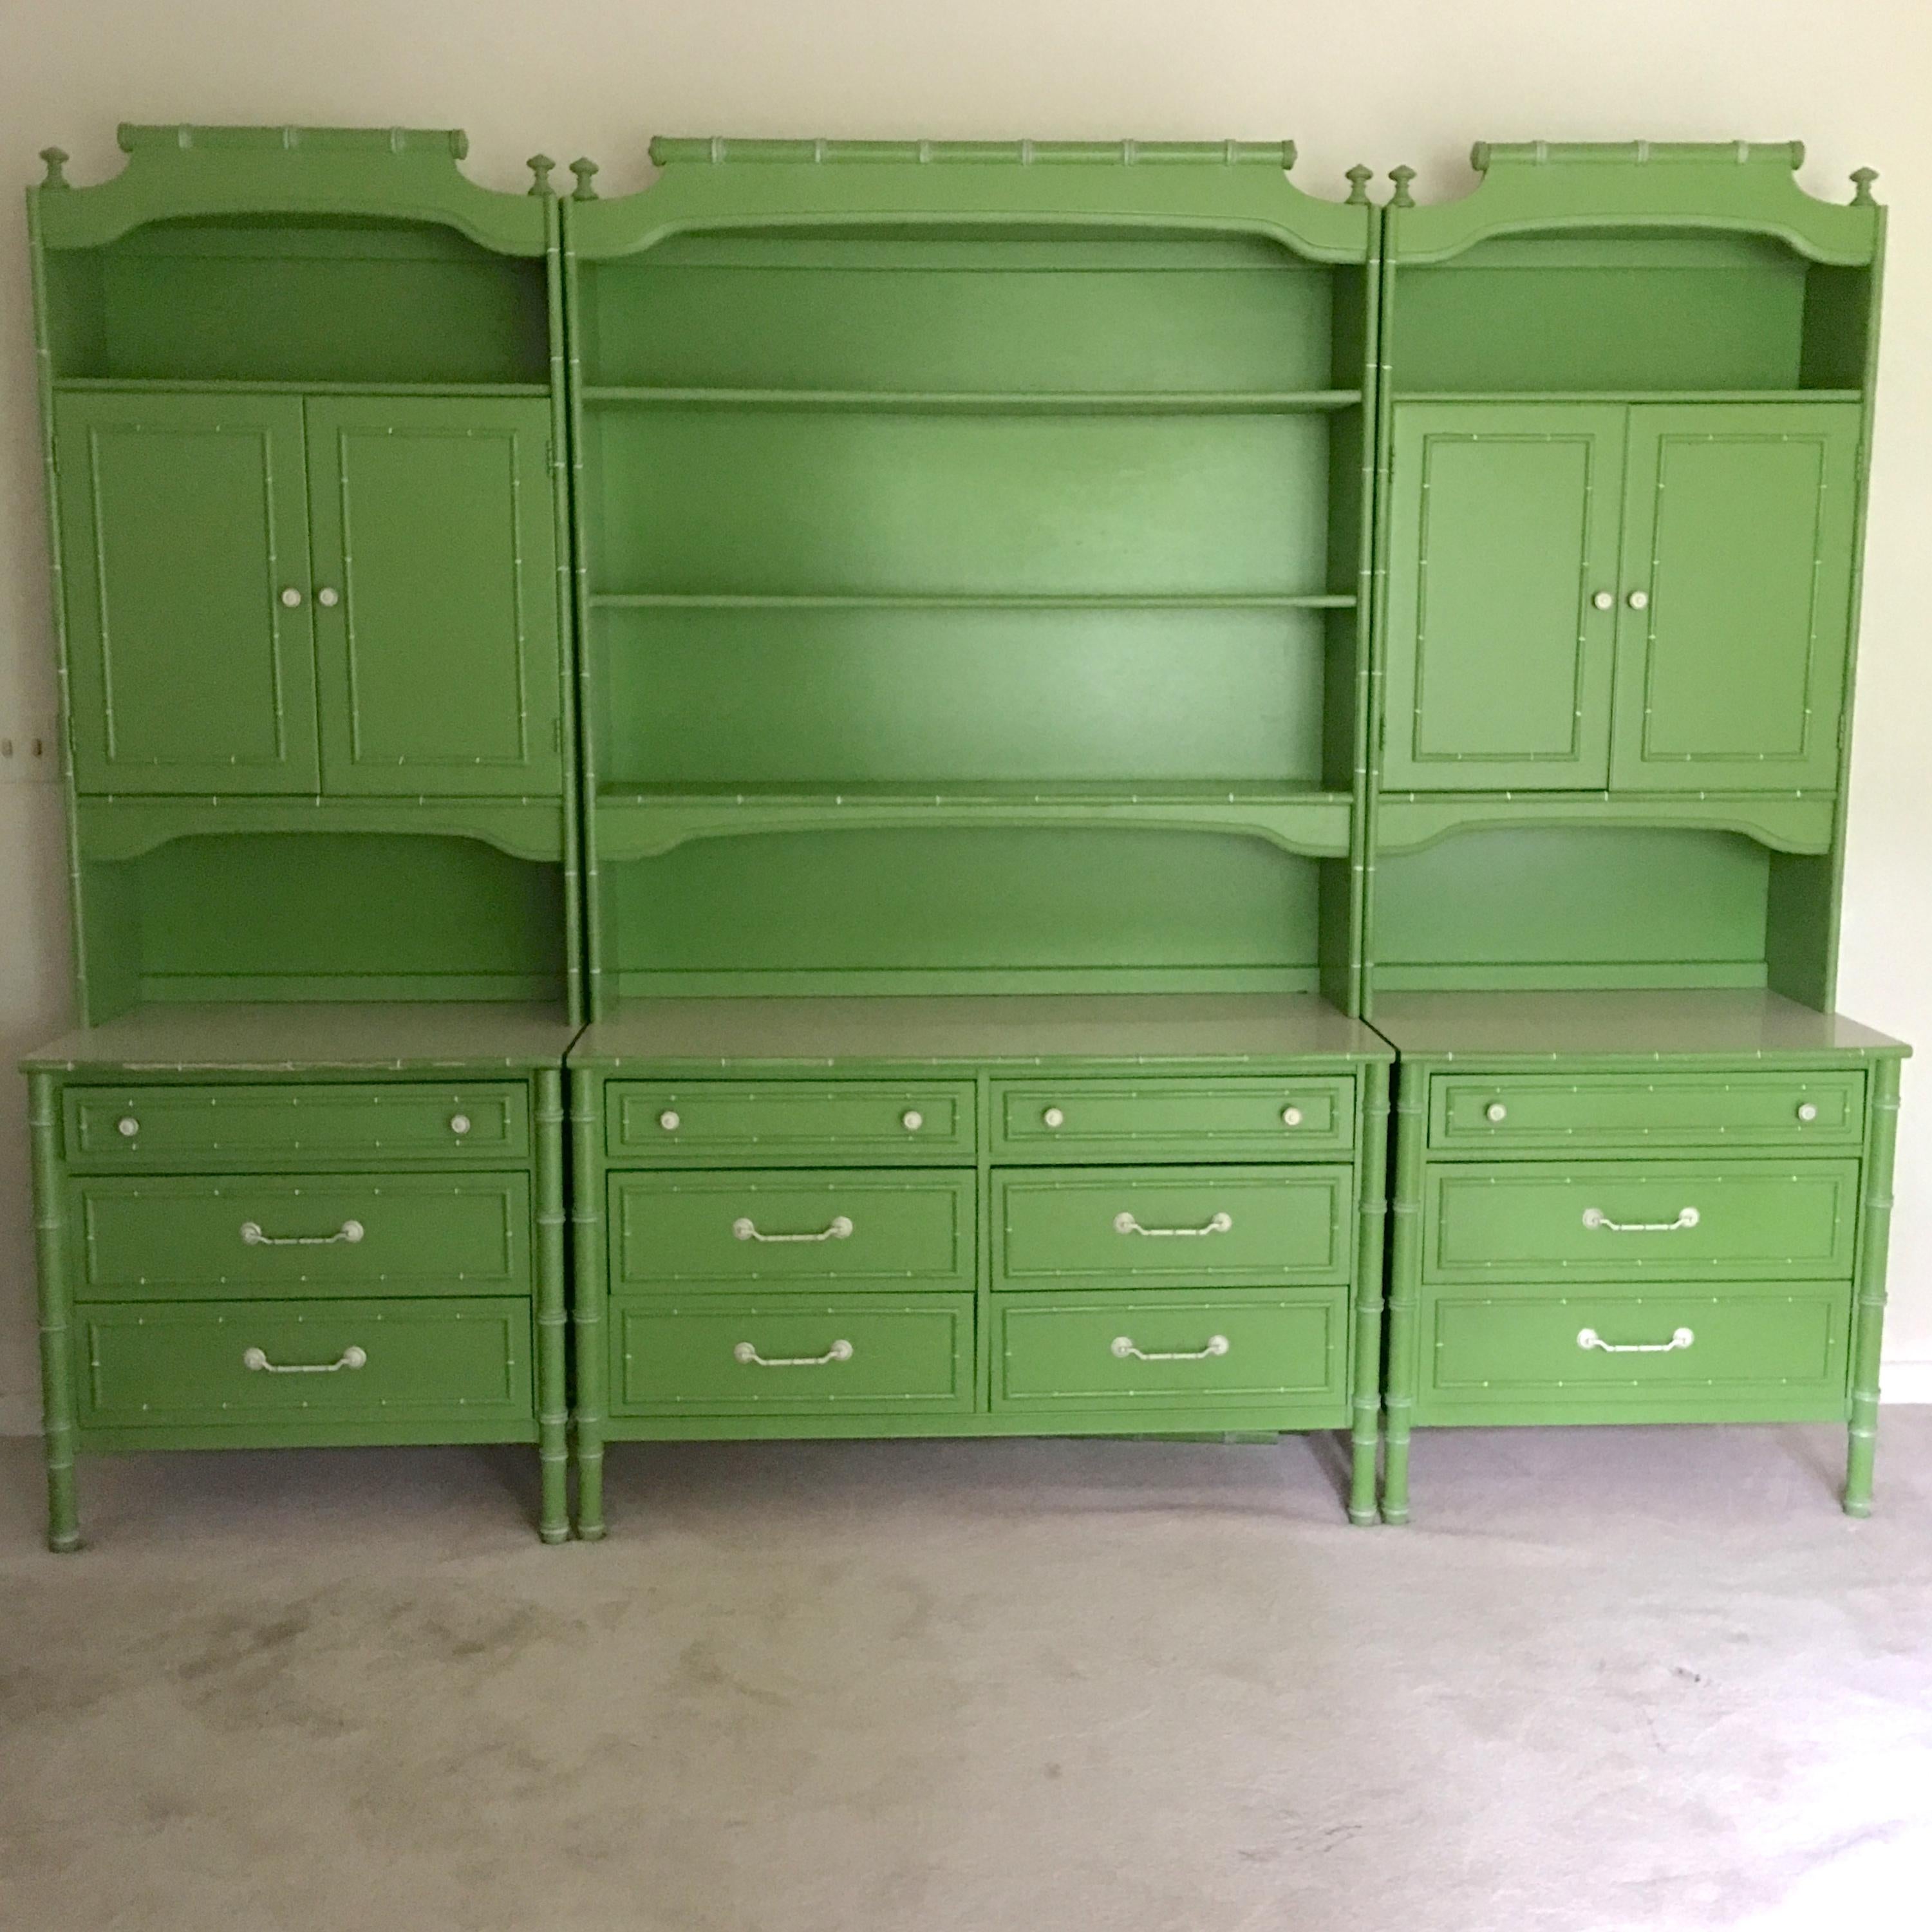 Three Hollywood Regency faux bamboo dressers with hutches. Many uses for this original 1970s storage and display system by Thomasville from their Allegro collection in bright green with white striated laminated tops to the three chests of